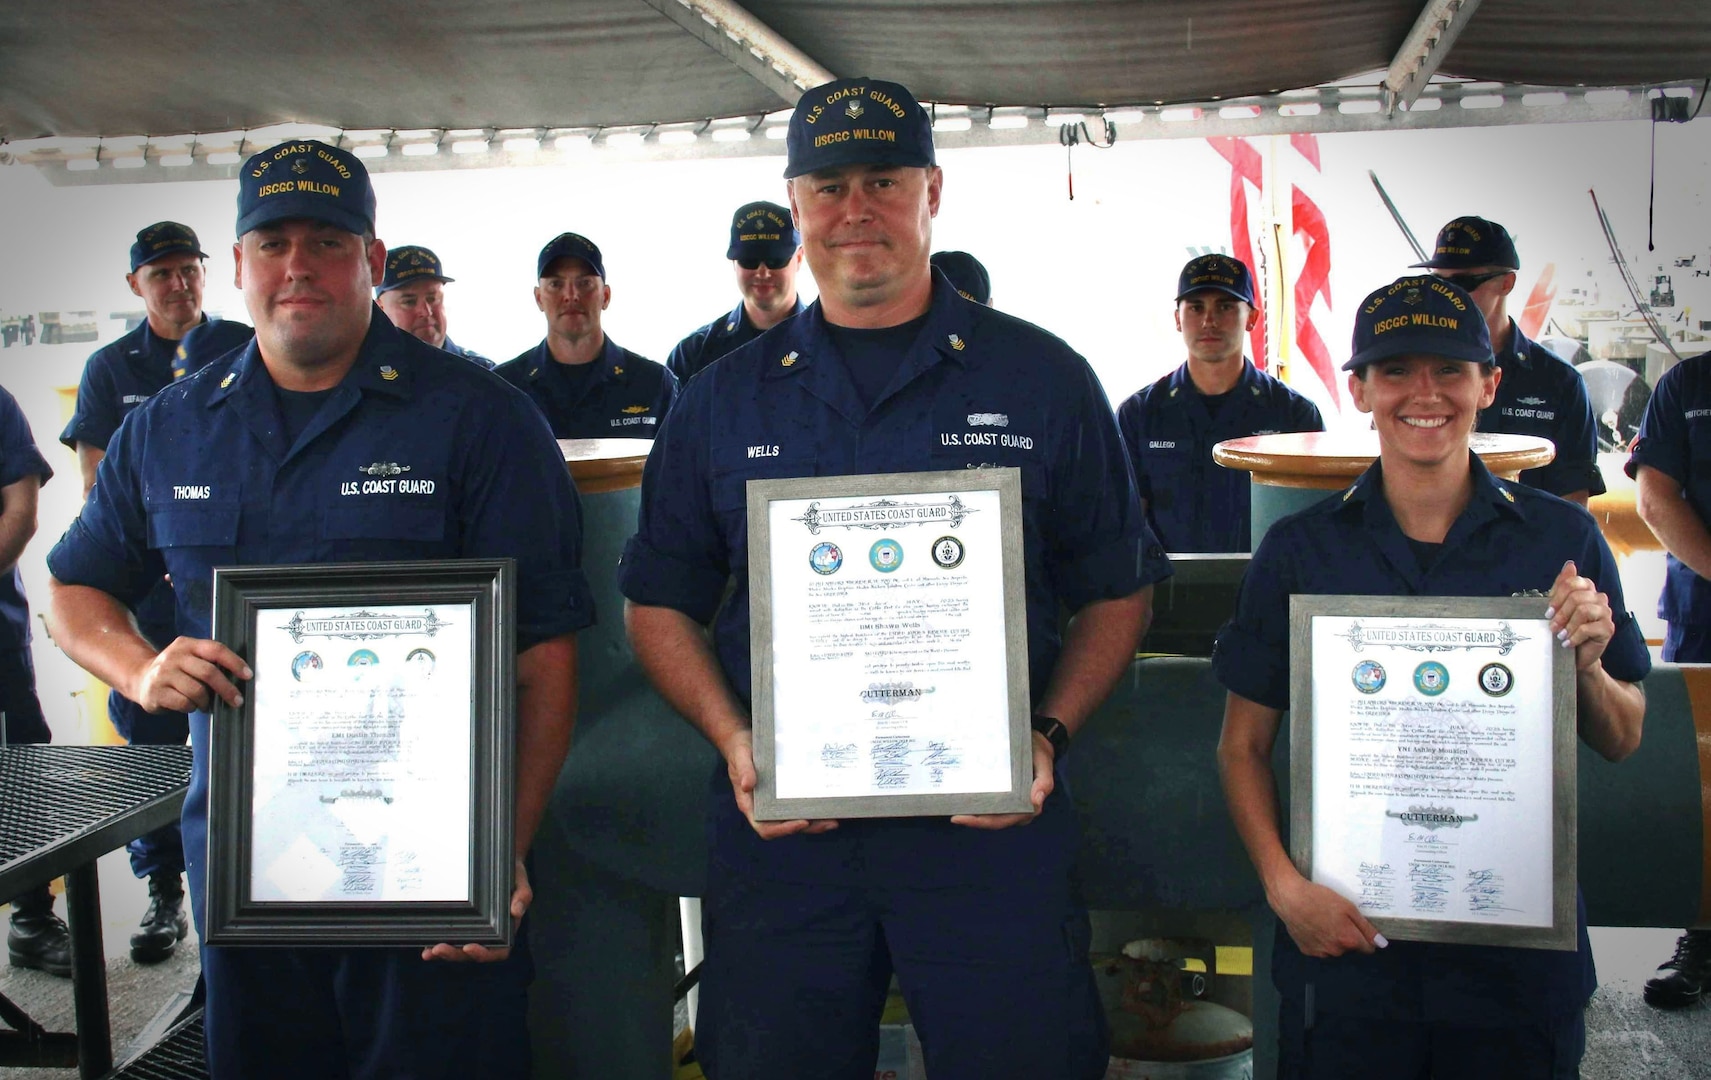 Electrician’s Mate First Class Petty Officer Dustin Thomas (left), Boatswain’s Mate First Class Petty Officer Shawn Wells (center), and Yeoman First Class Petty Officer Ashley Moulden (right) celebrate their reception into the hallowed ranks of Cuttermen aboard the CGC Willow on July 5, 2023. The Cutterman insignia signifies that they have exhibited the requisite professionalism and dedication to duty expected of seagoing Coast Guard personnel.